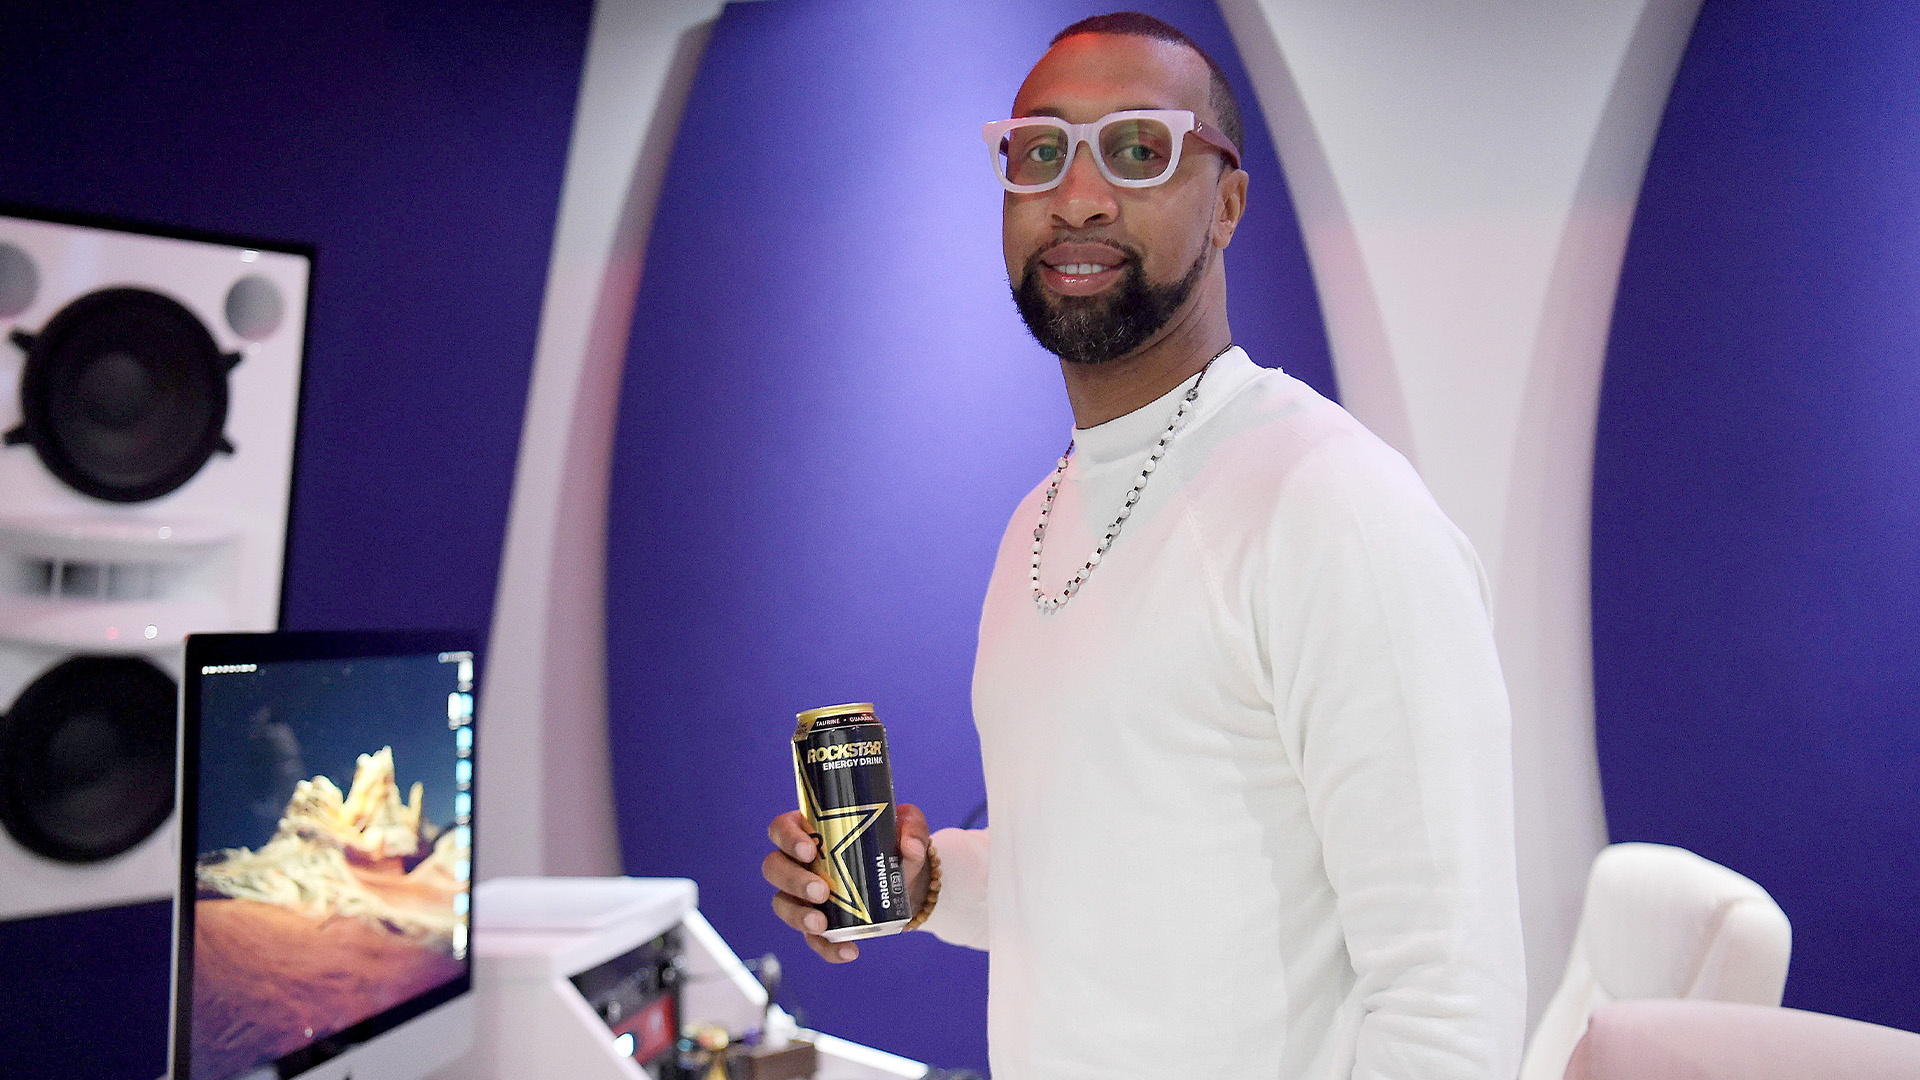 Rockstar Energy Teams Up With Cortez Bryant To Launch A Resource Hub For Black Artists In Atlanta's AUC